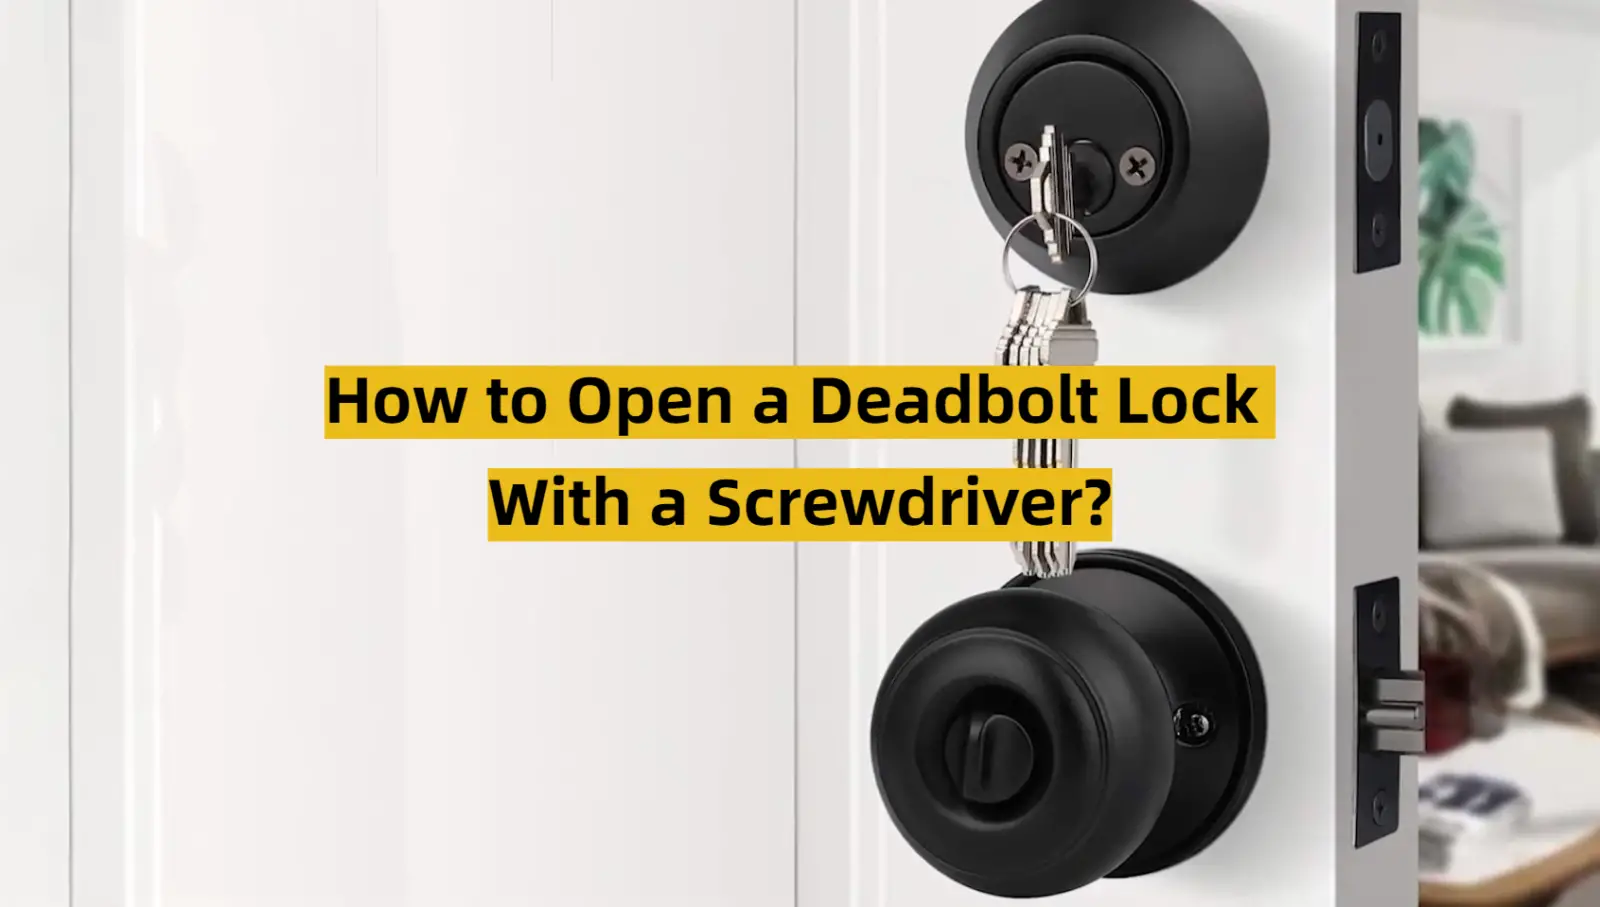 How to Open a Deadbolt Lock With a Screwdriver?